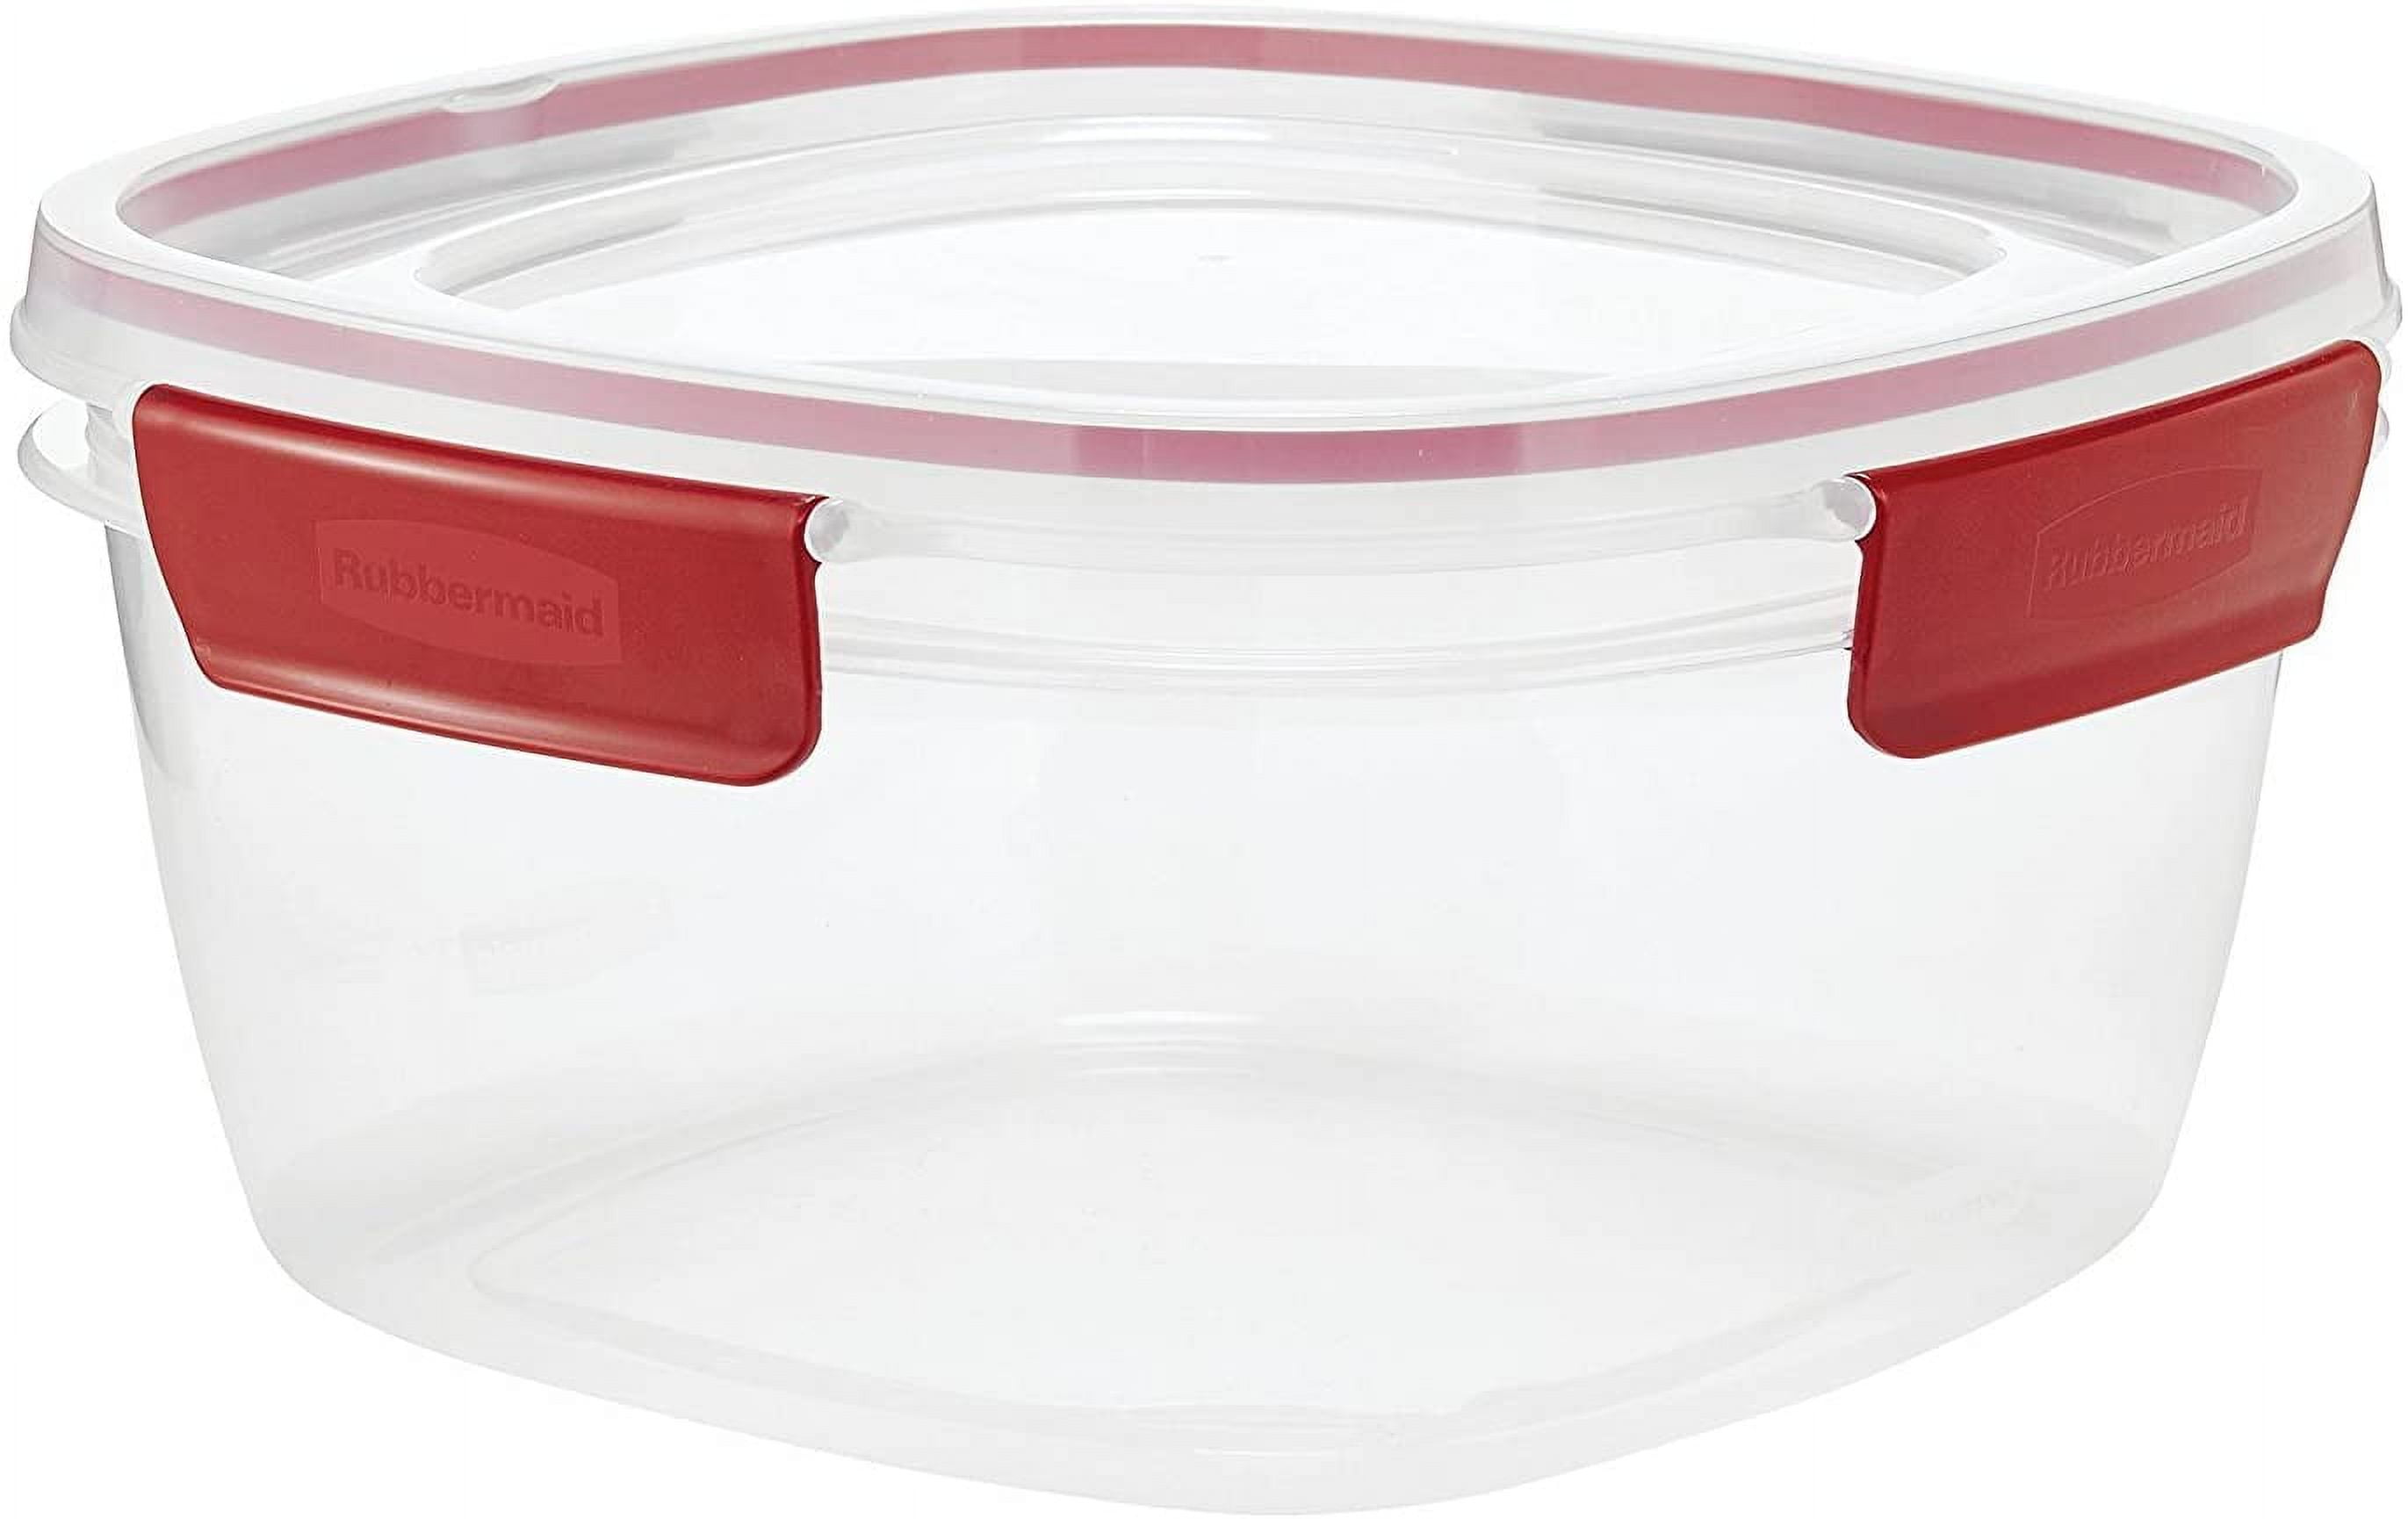 Rubbermaid 1776401 1 1/4-Cup Easy Find Lid Food Storage Container